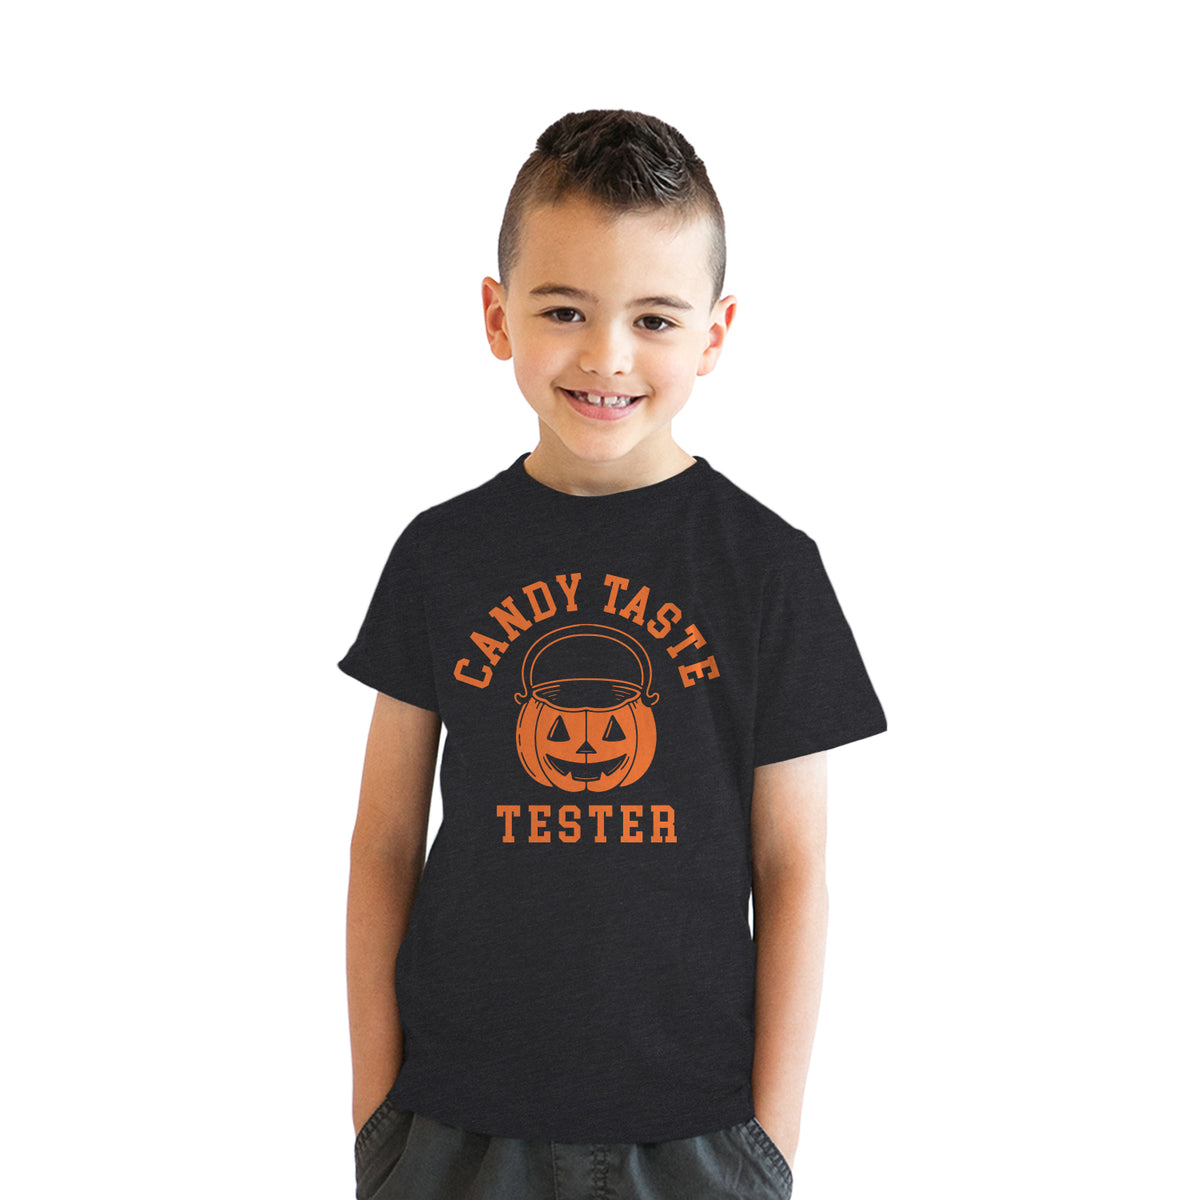 Candy Taste Tester Youth T Shirt